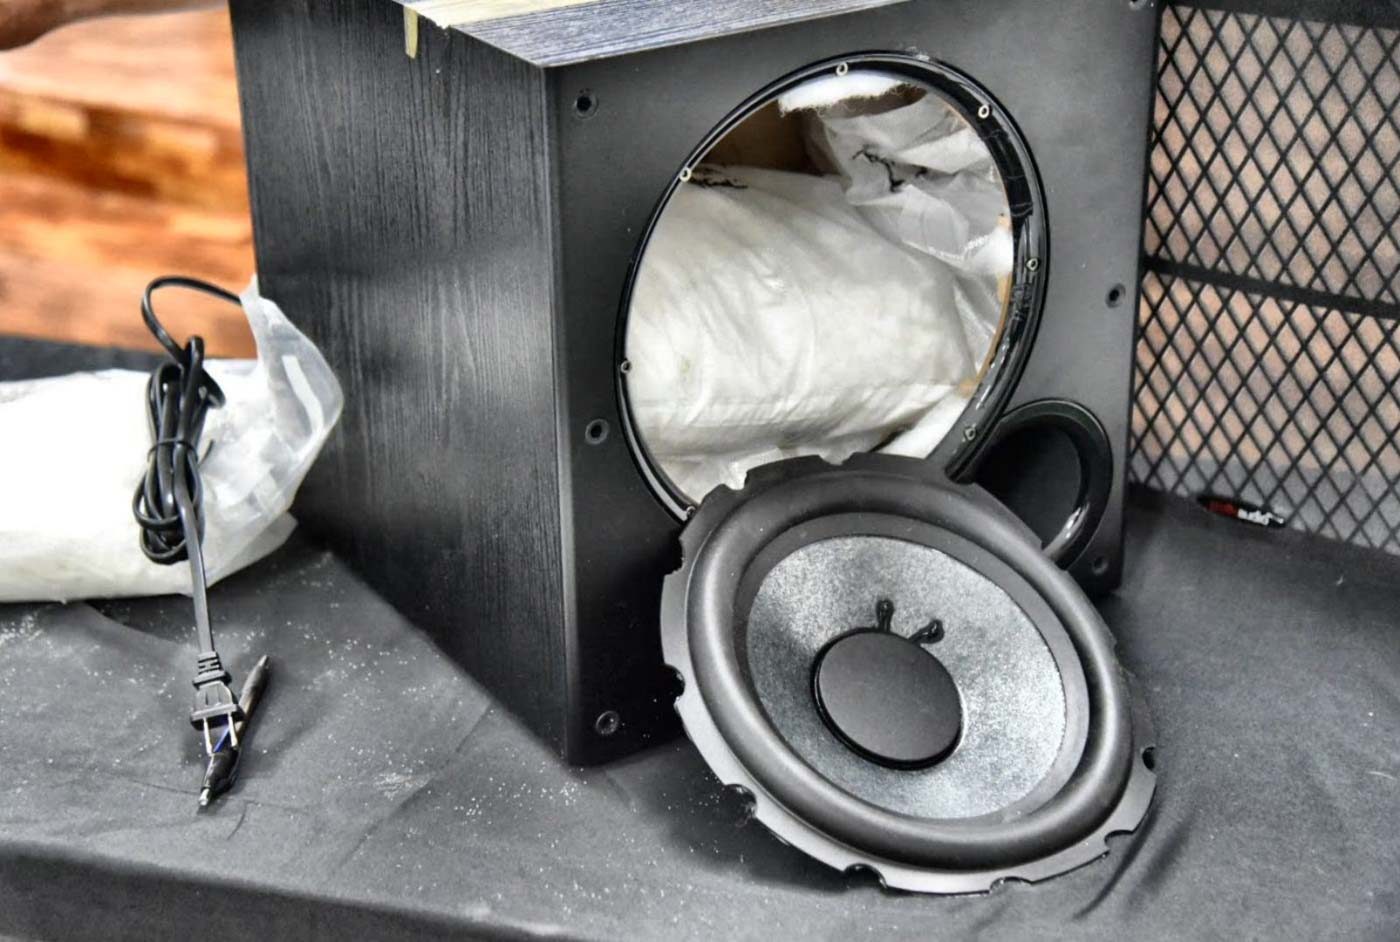 P141-M shabu packed in speakers seized from Pasay warehouse